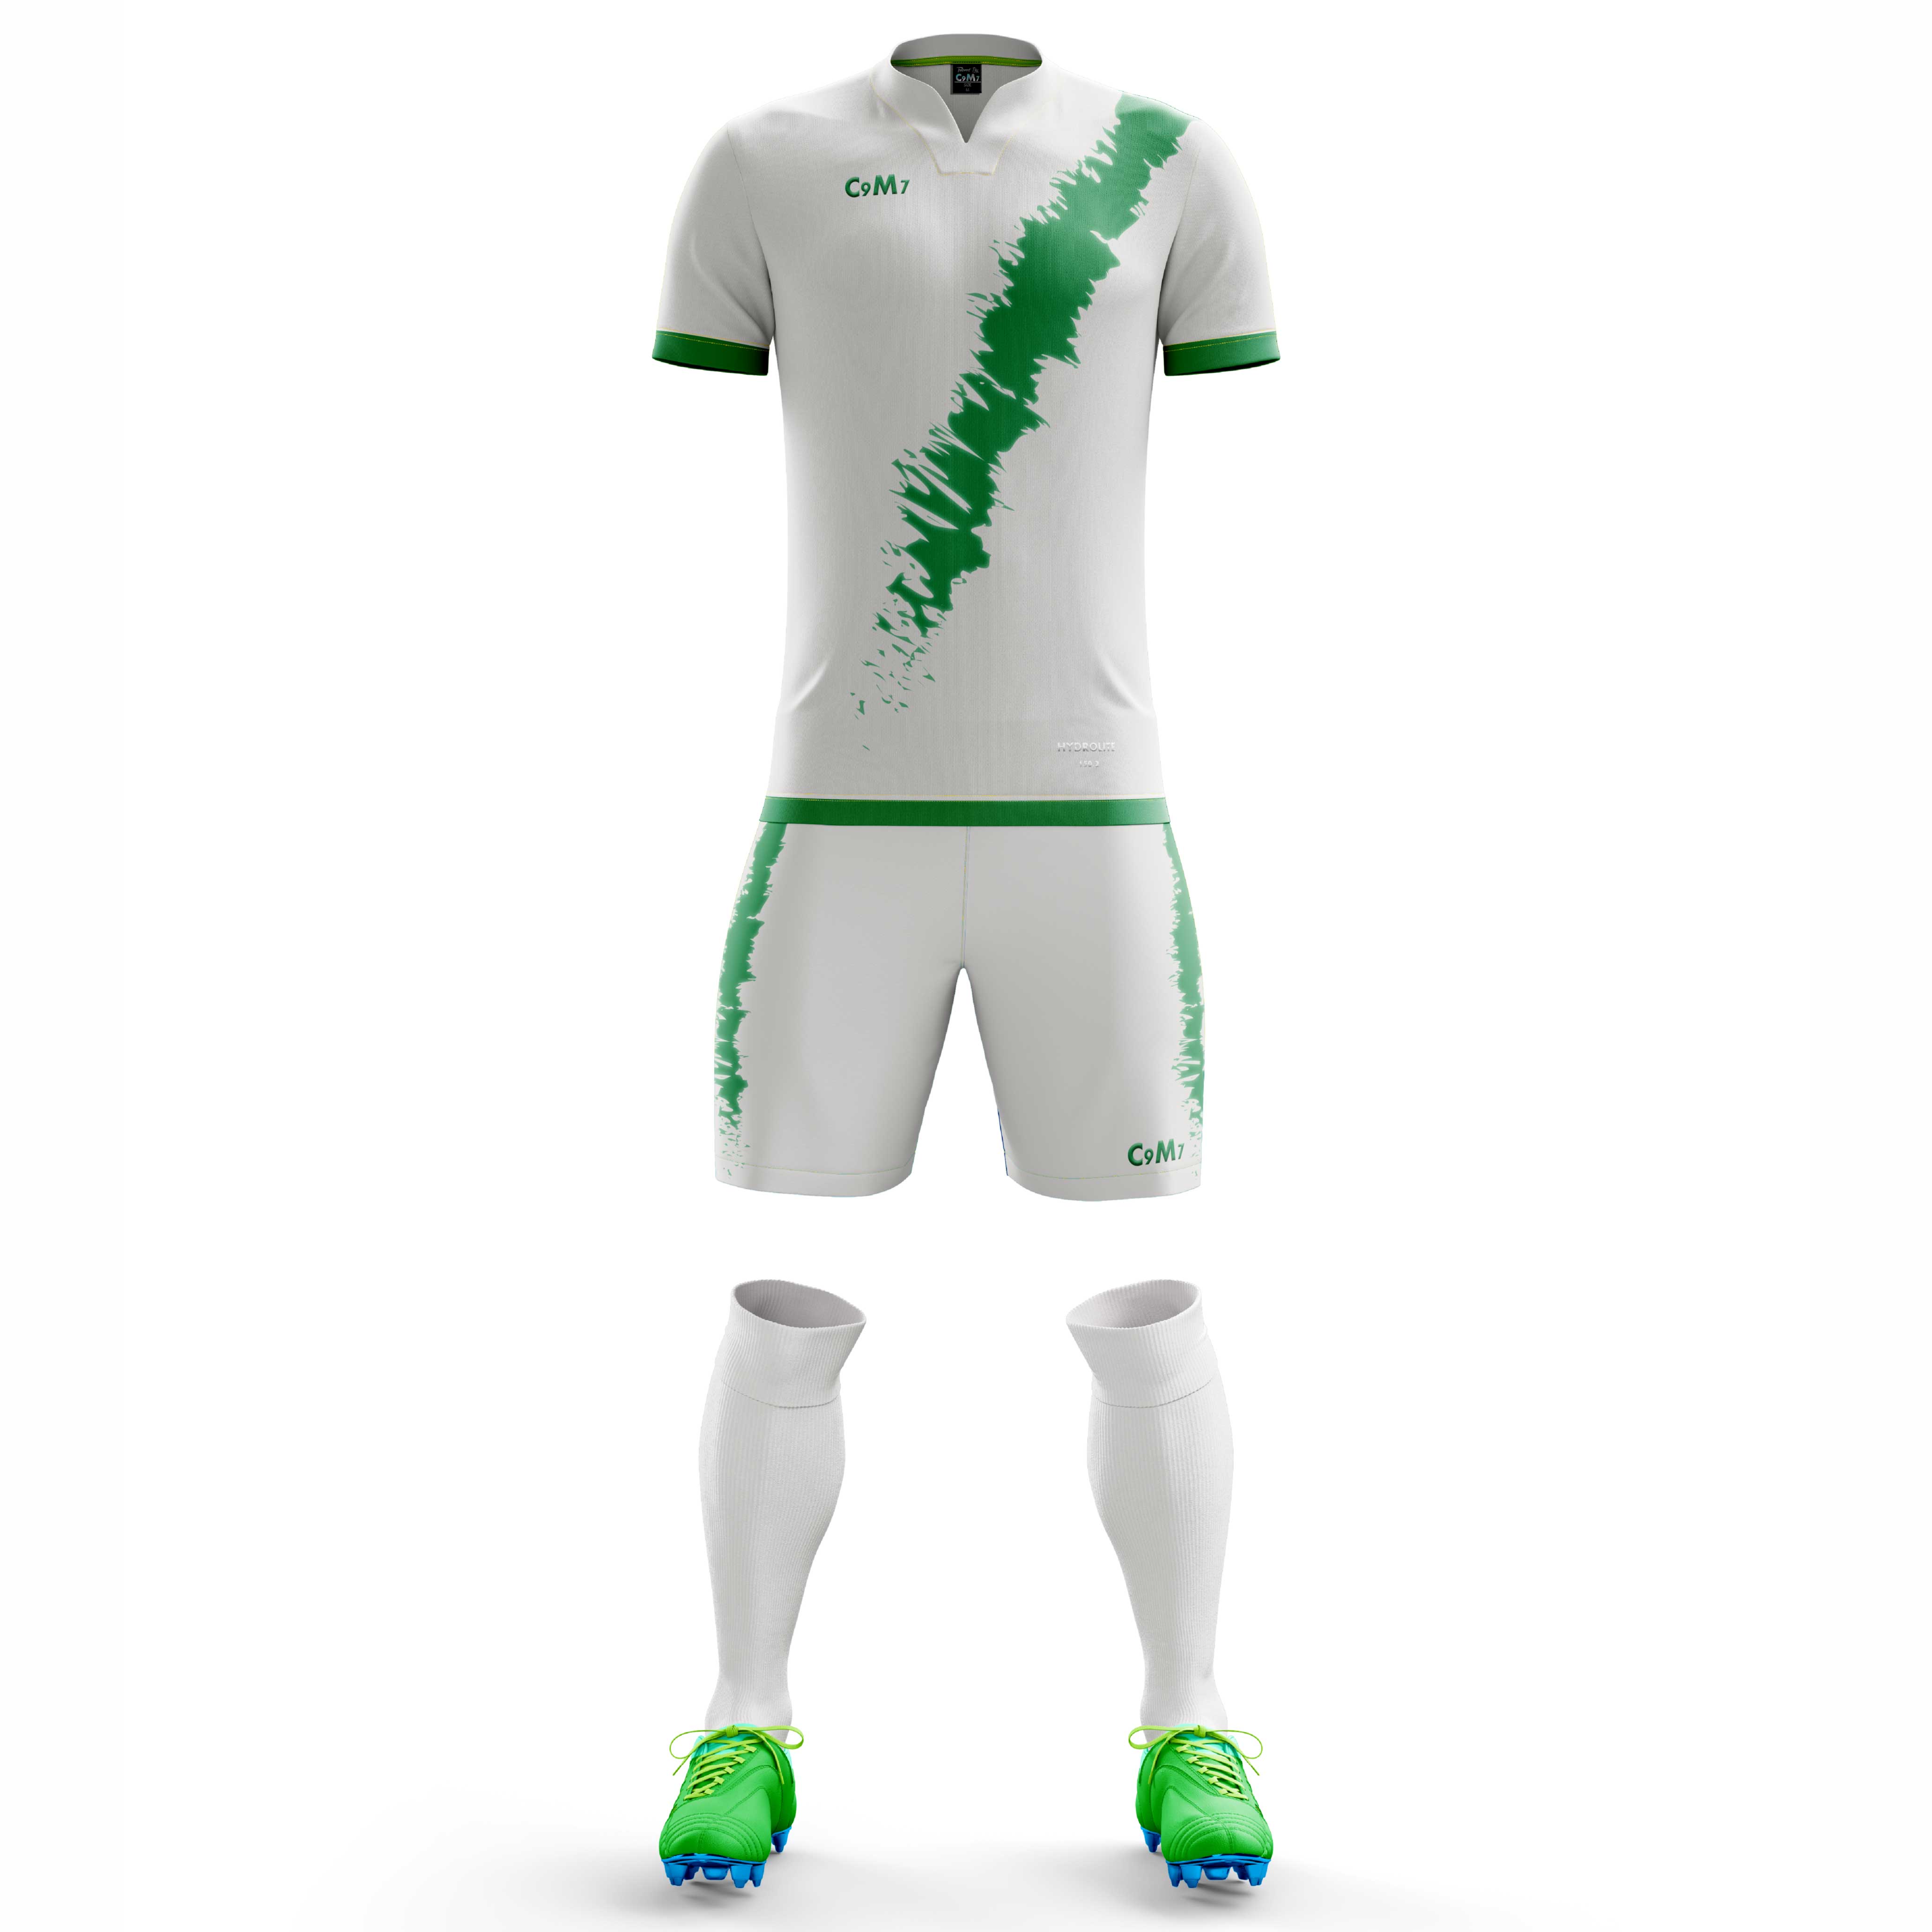 green and white soccer jersey team